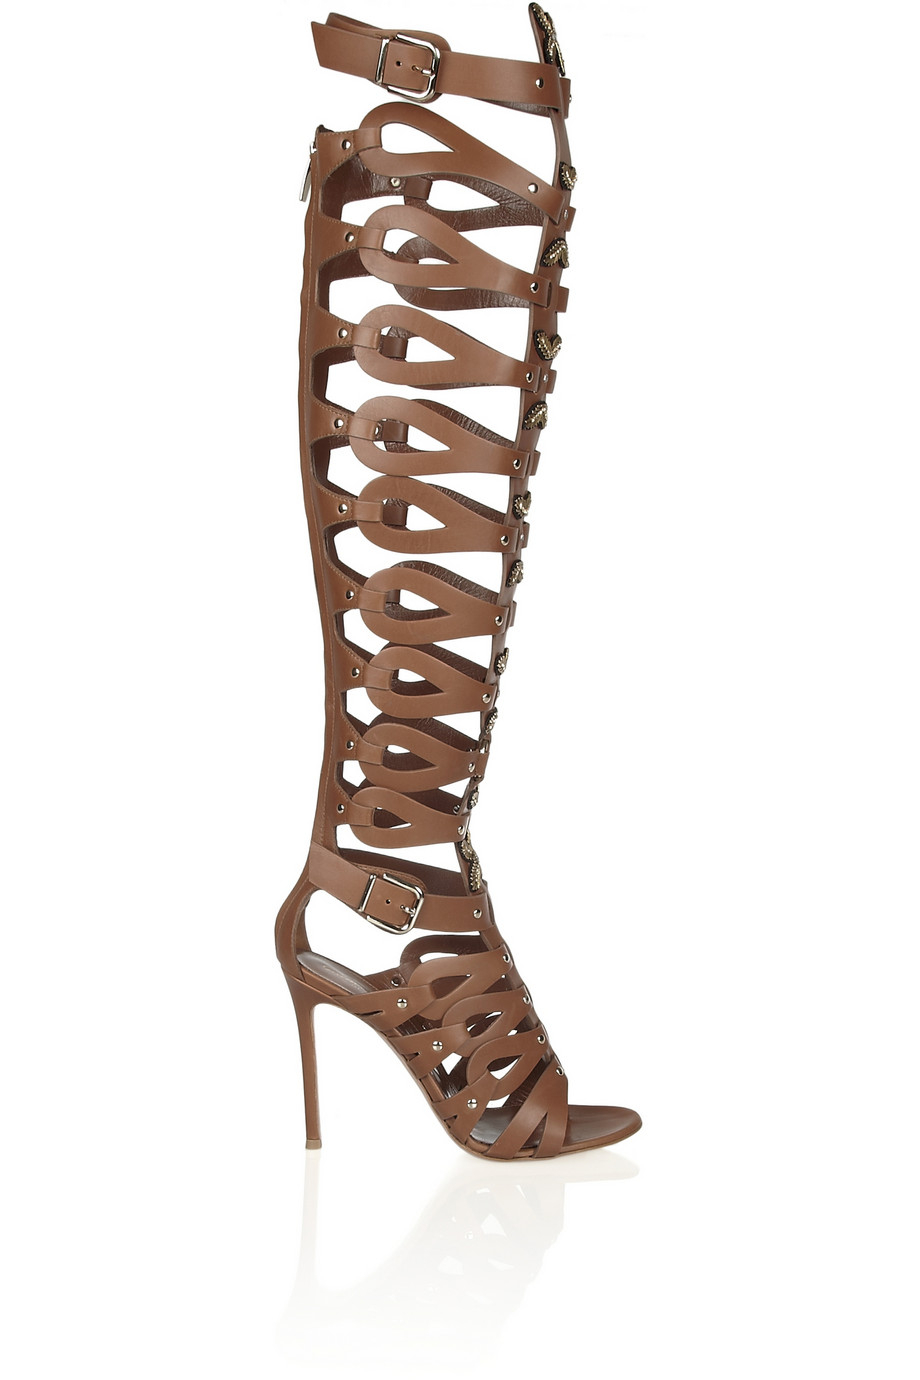 Altuzarra Gianvito Rossi Embellished Leather Cage Sandals in Brown | Lyst